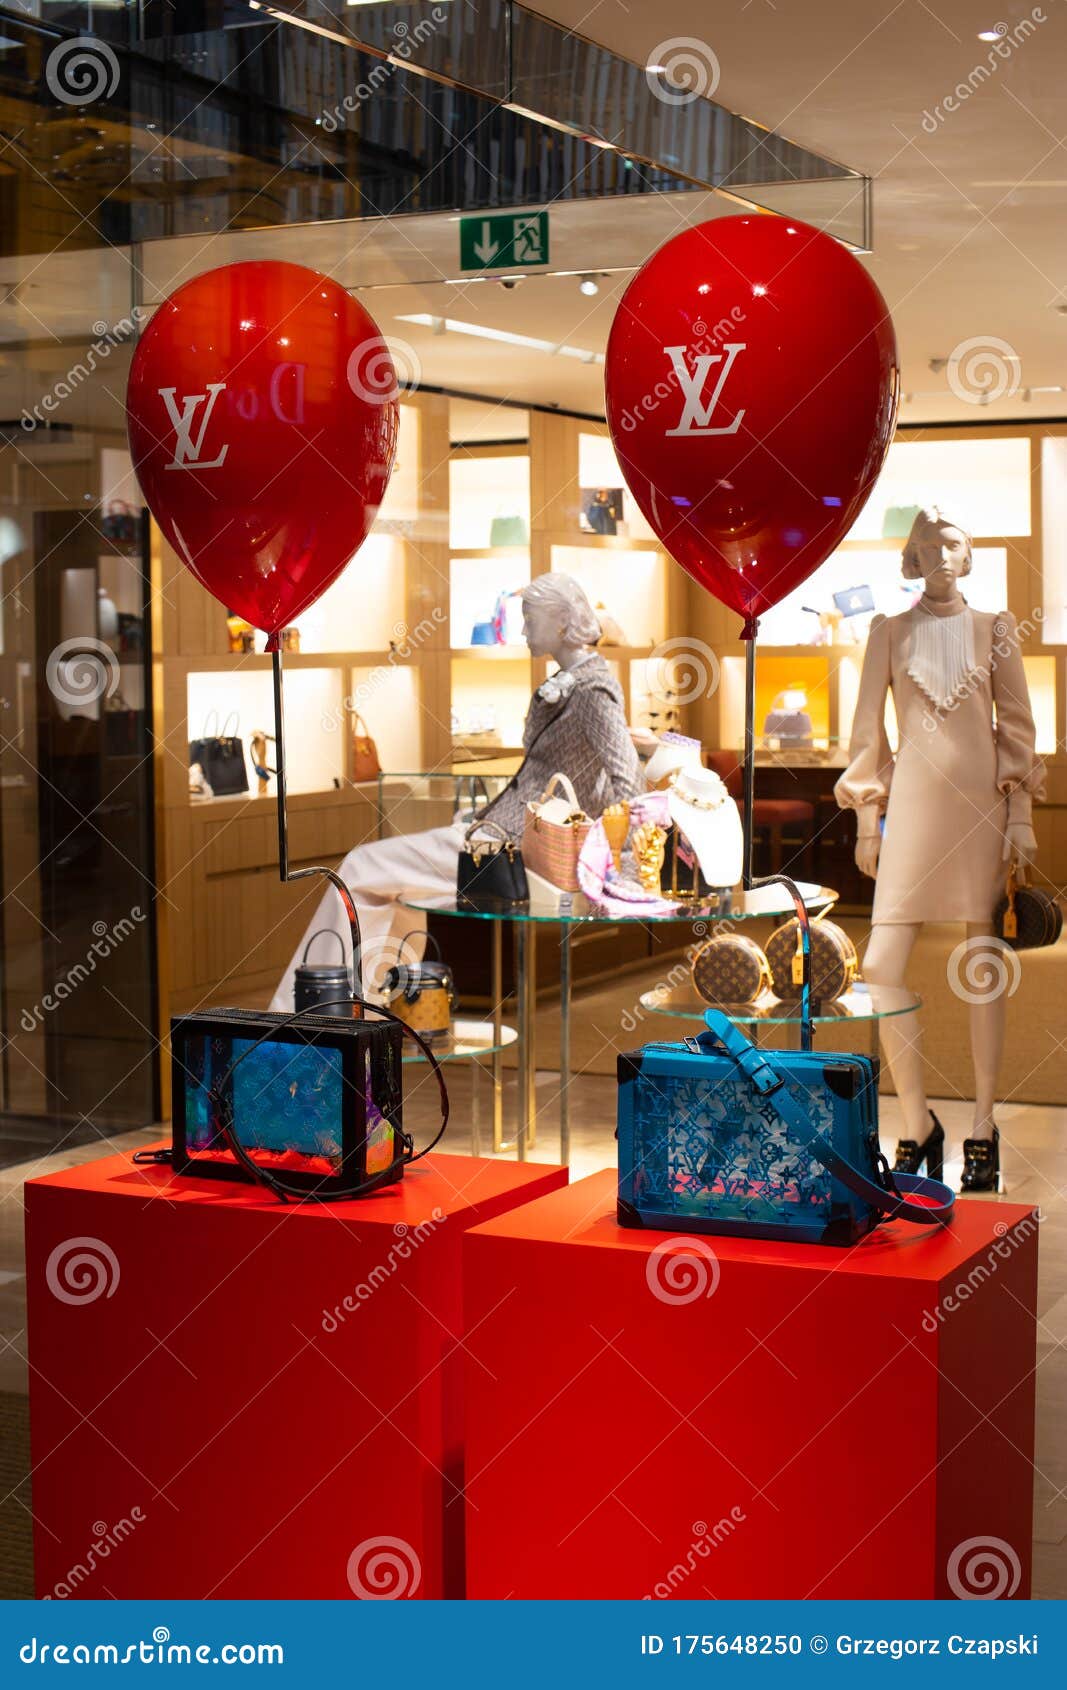 LV Louis Vuitton Fashion Store, Window Shop, Bags, Clothes and